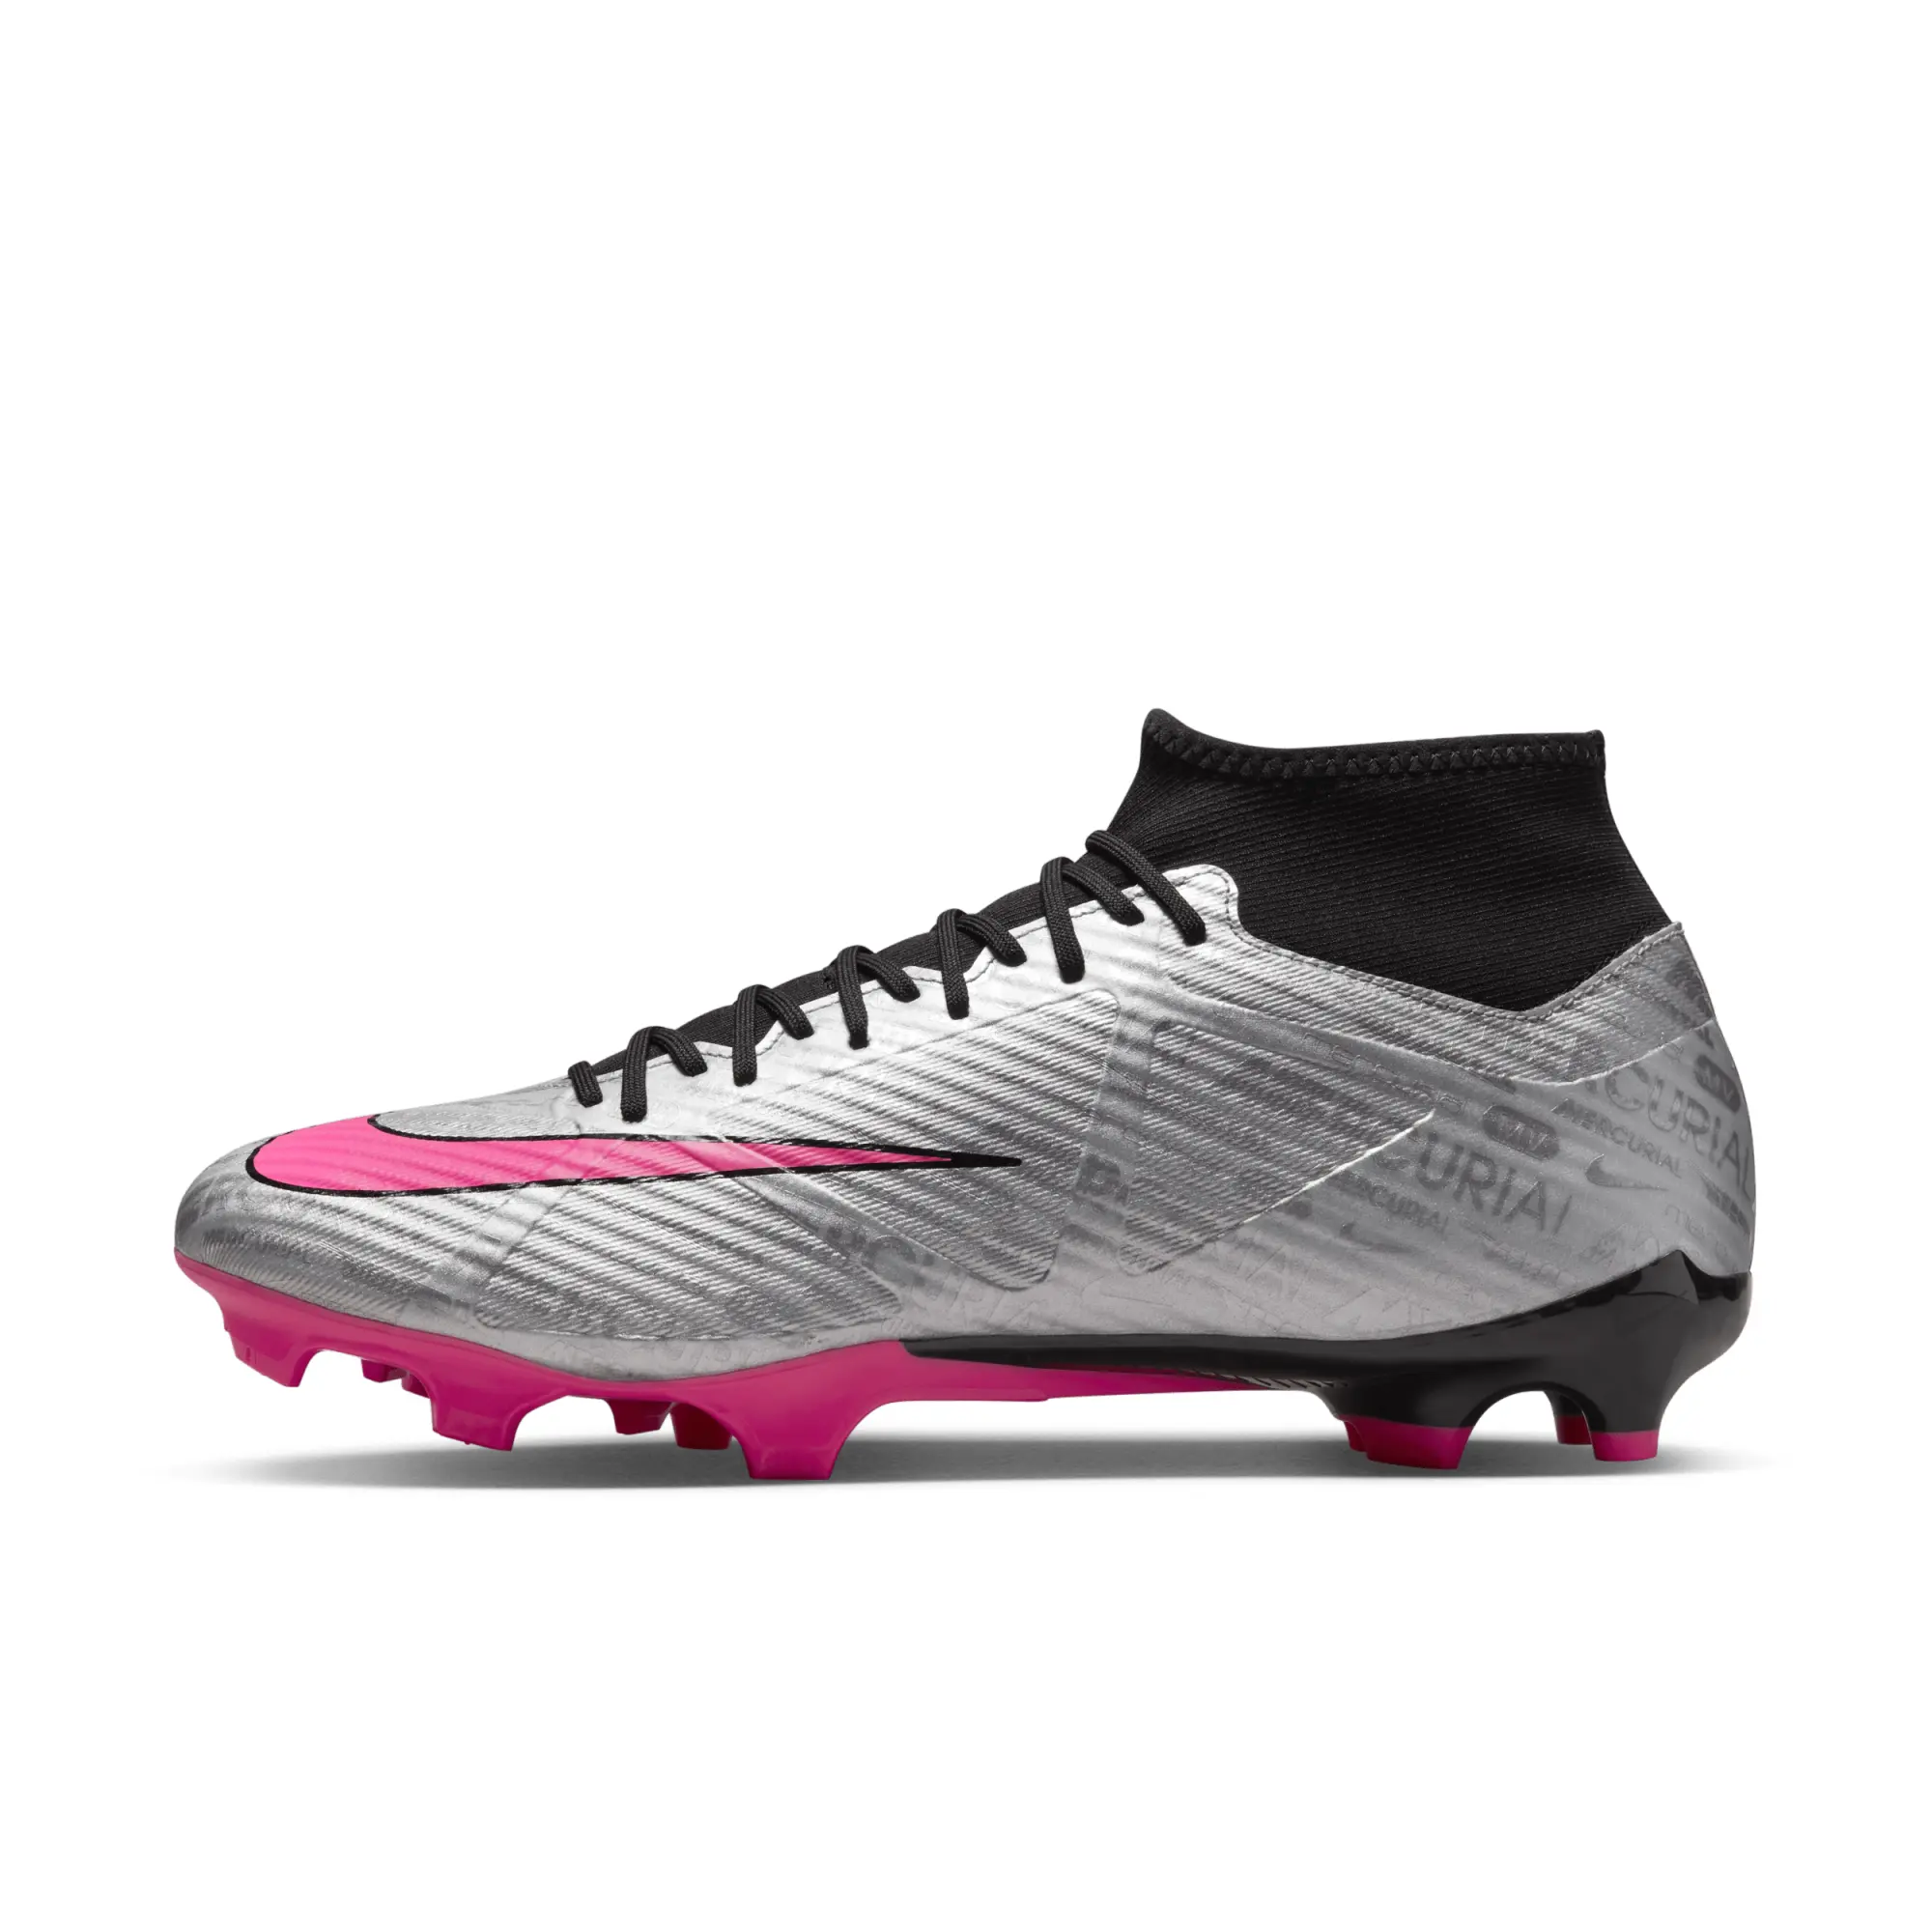 Nike Mercurial Superfly Academy DF FG Football Boots - Silver